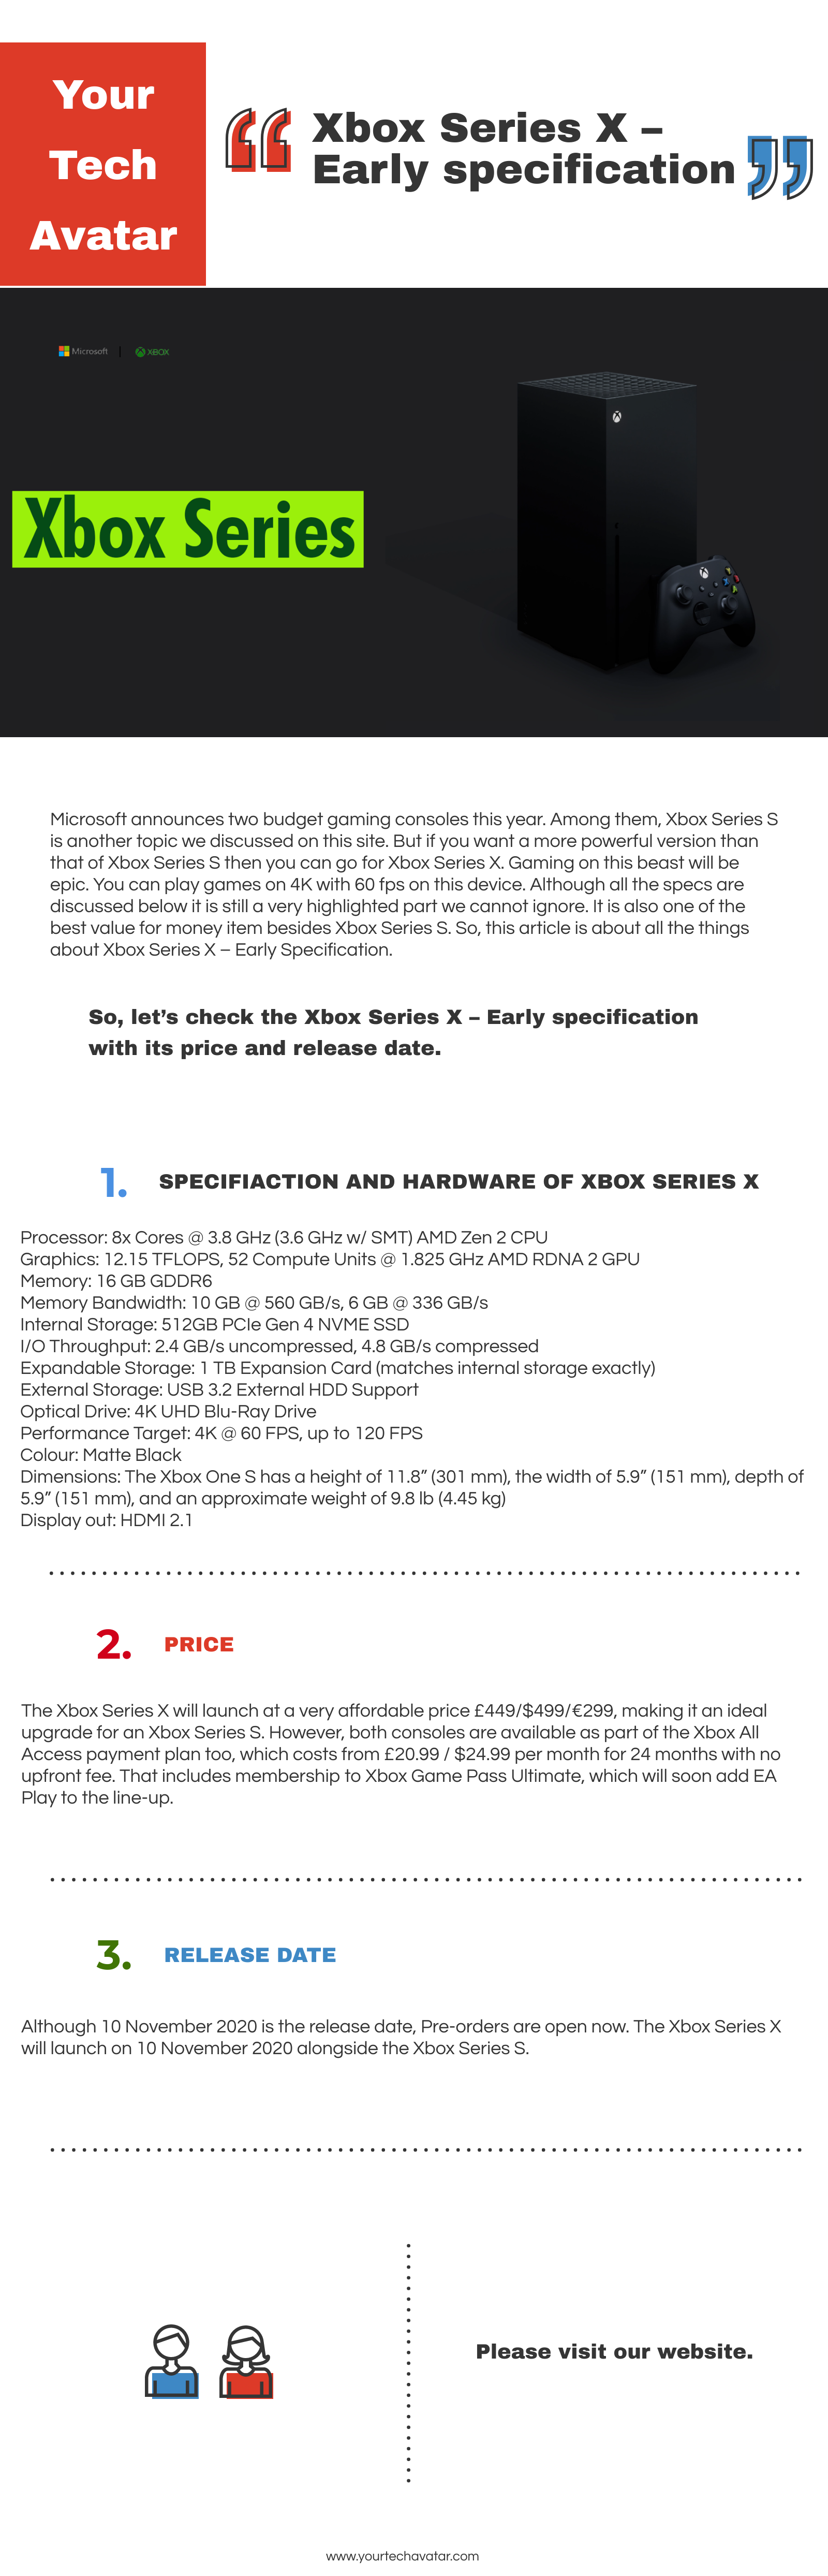 Infographic for Xbox Series X - Early specification